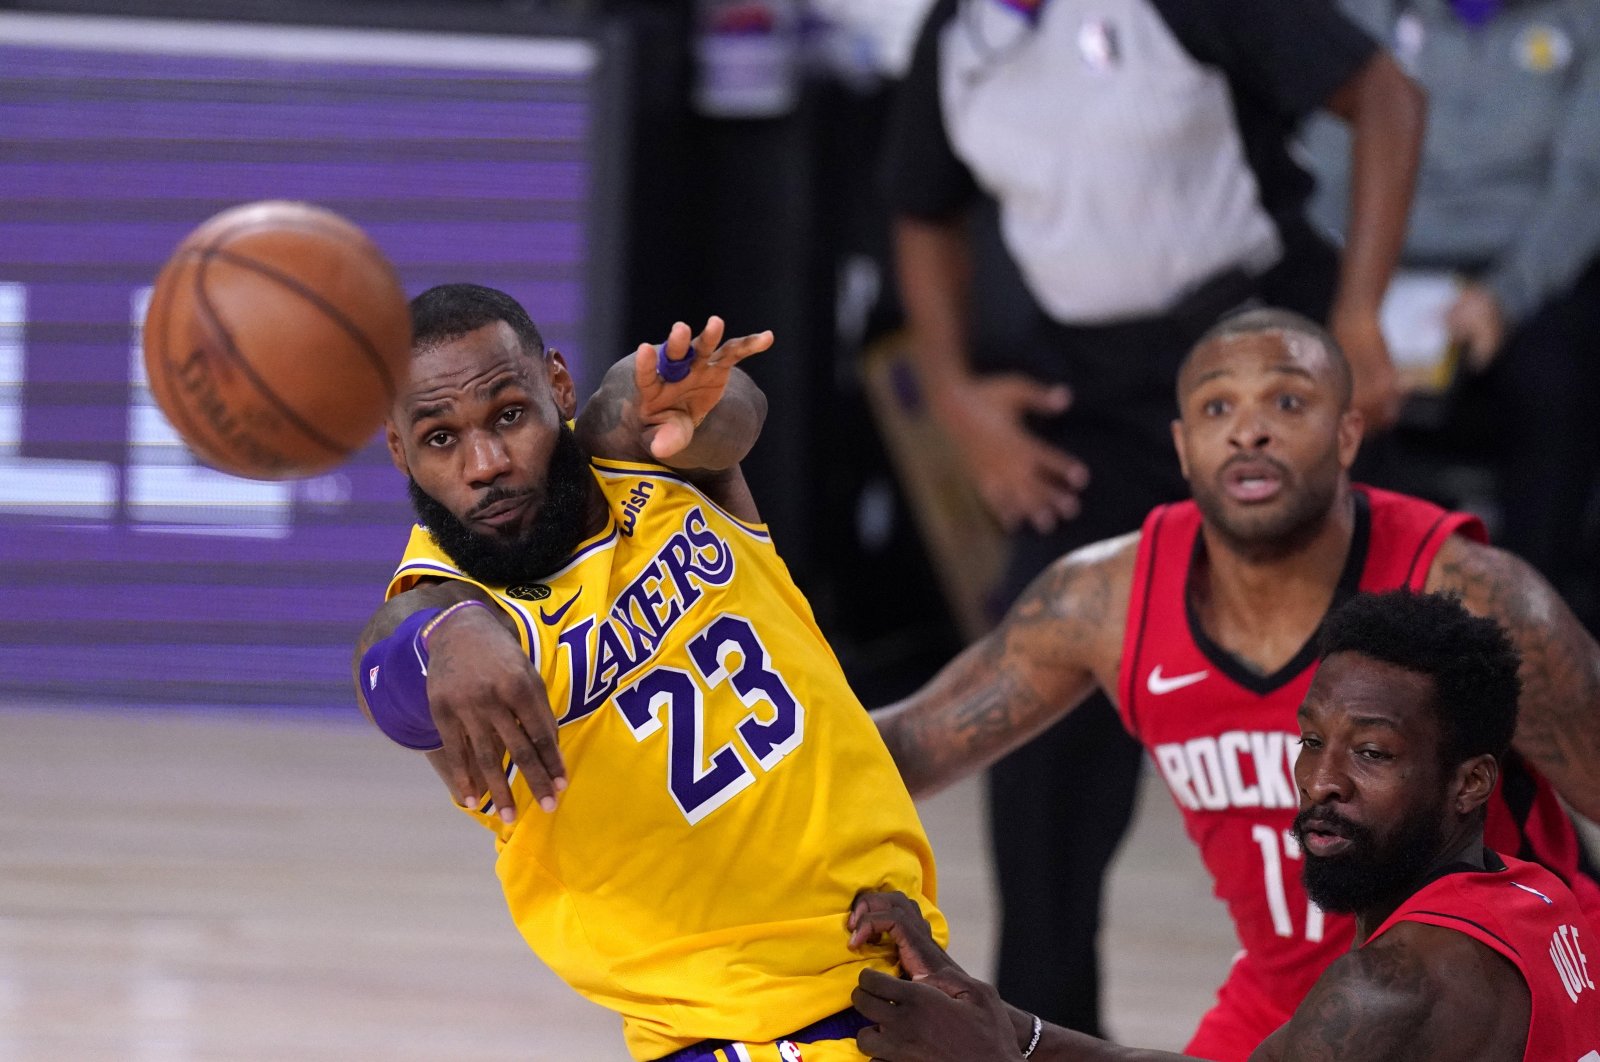 Los Angeles Lakers' LeBron James (L) passes the ball during an NBA match against the Houston Rockets in Lake Buena Vista, Florida, U.S., Sept. 10, 2020. (AP Photo)